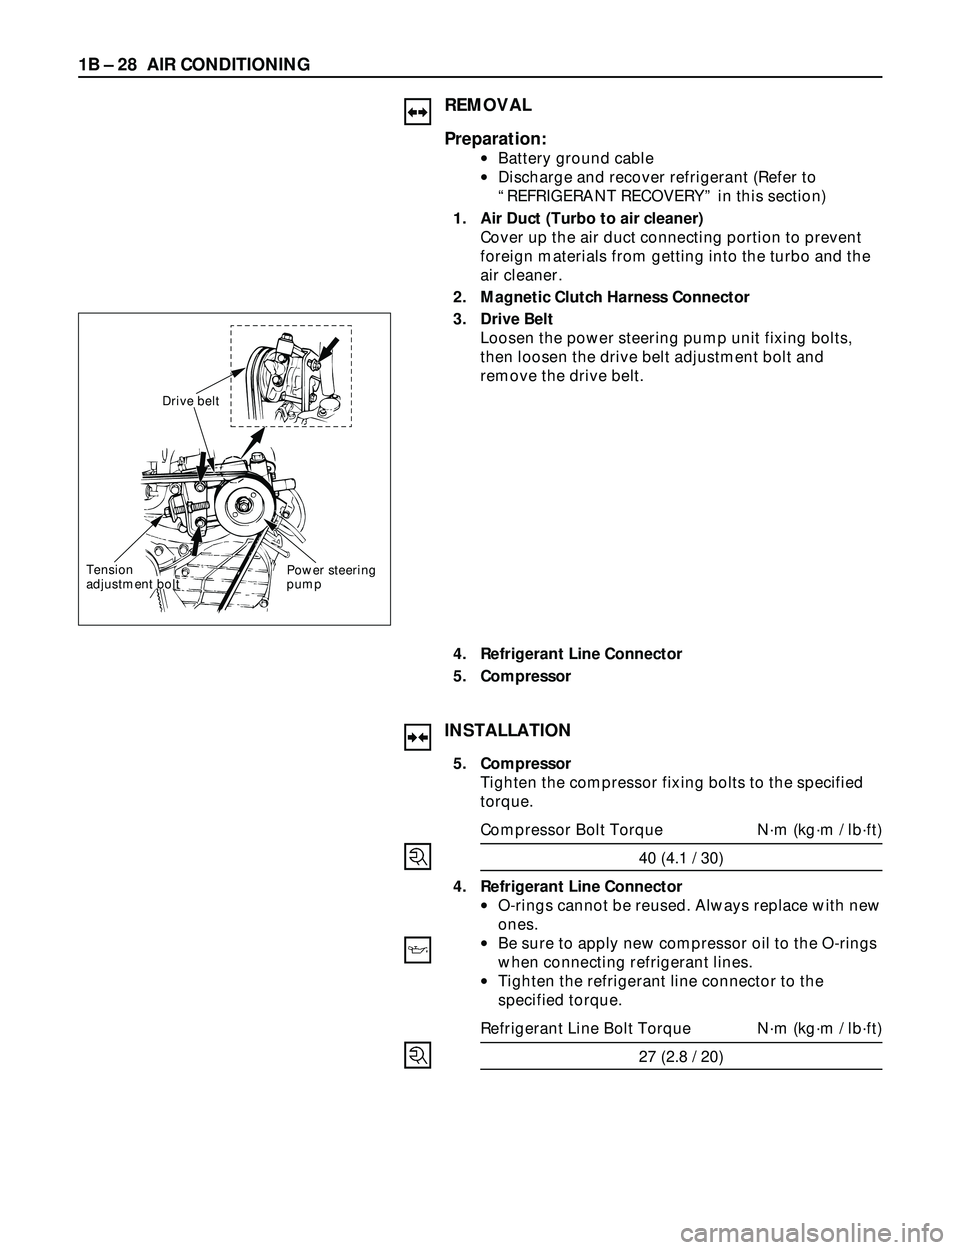 ISUZU TROOPER 1998  Service Owners Guide 1B Ð 28 AIR CONDITIONING
REMOVAL
Preparation:
·Battery ground cable
·Discharge and recover refrigerant (Refer to
ÒREFRIGERANT RECOVERYÓ in this section) 
1. Air Duct (Turbo to air cleaner)
Cover 